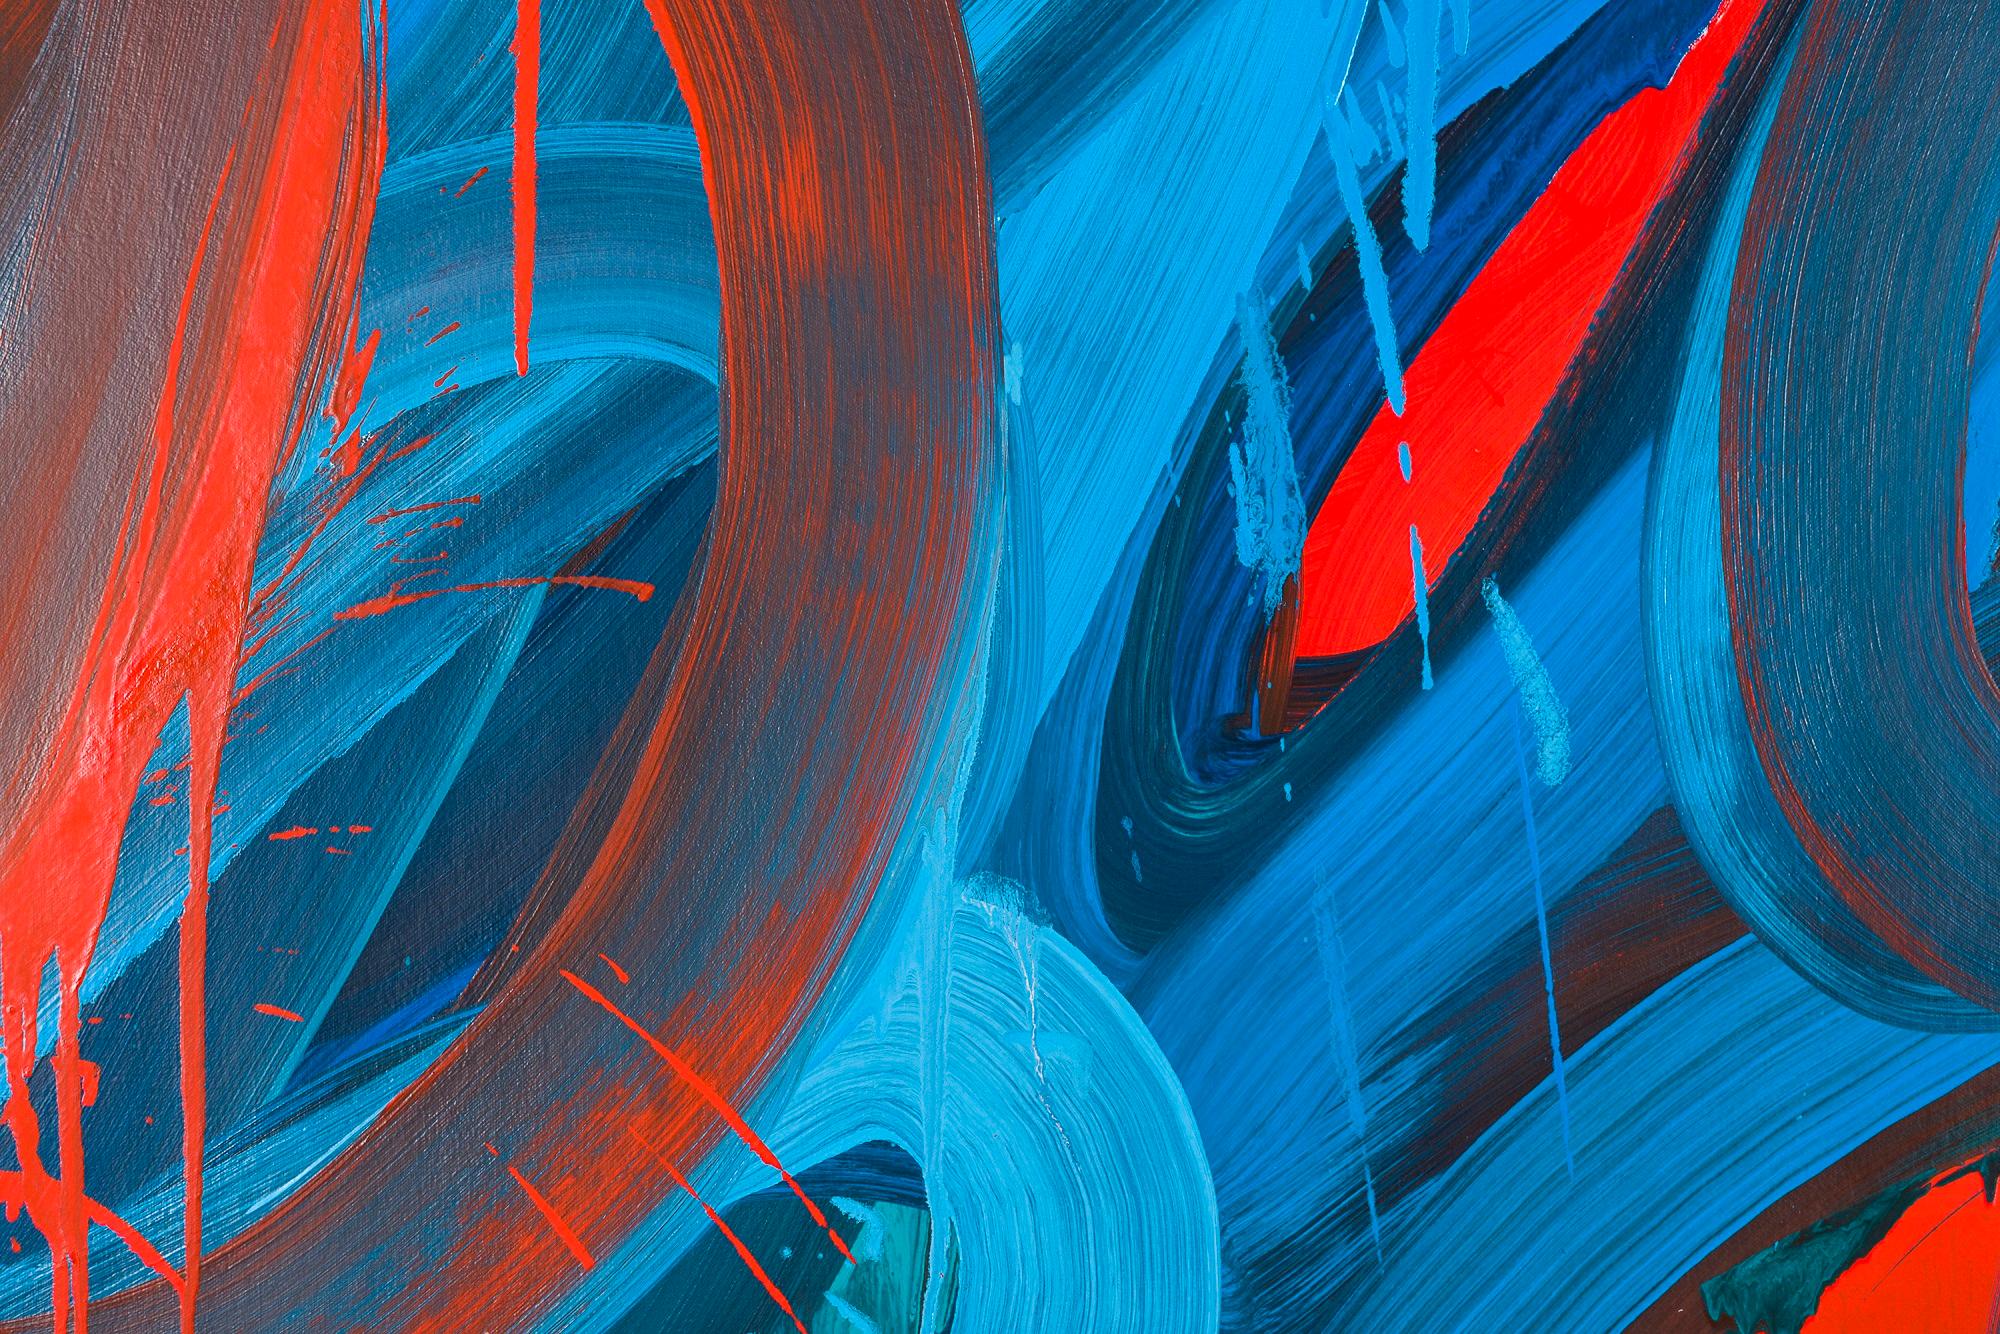 Swirl 3 (Abstract painting)

Oil on canvas.

This work is exclusive to IdeelArt. 

This artwork will be shipped rolled in a dent-resistant tube. This method is especially safe for large works, and provides lower shipping costs as well. 
Rolled works